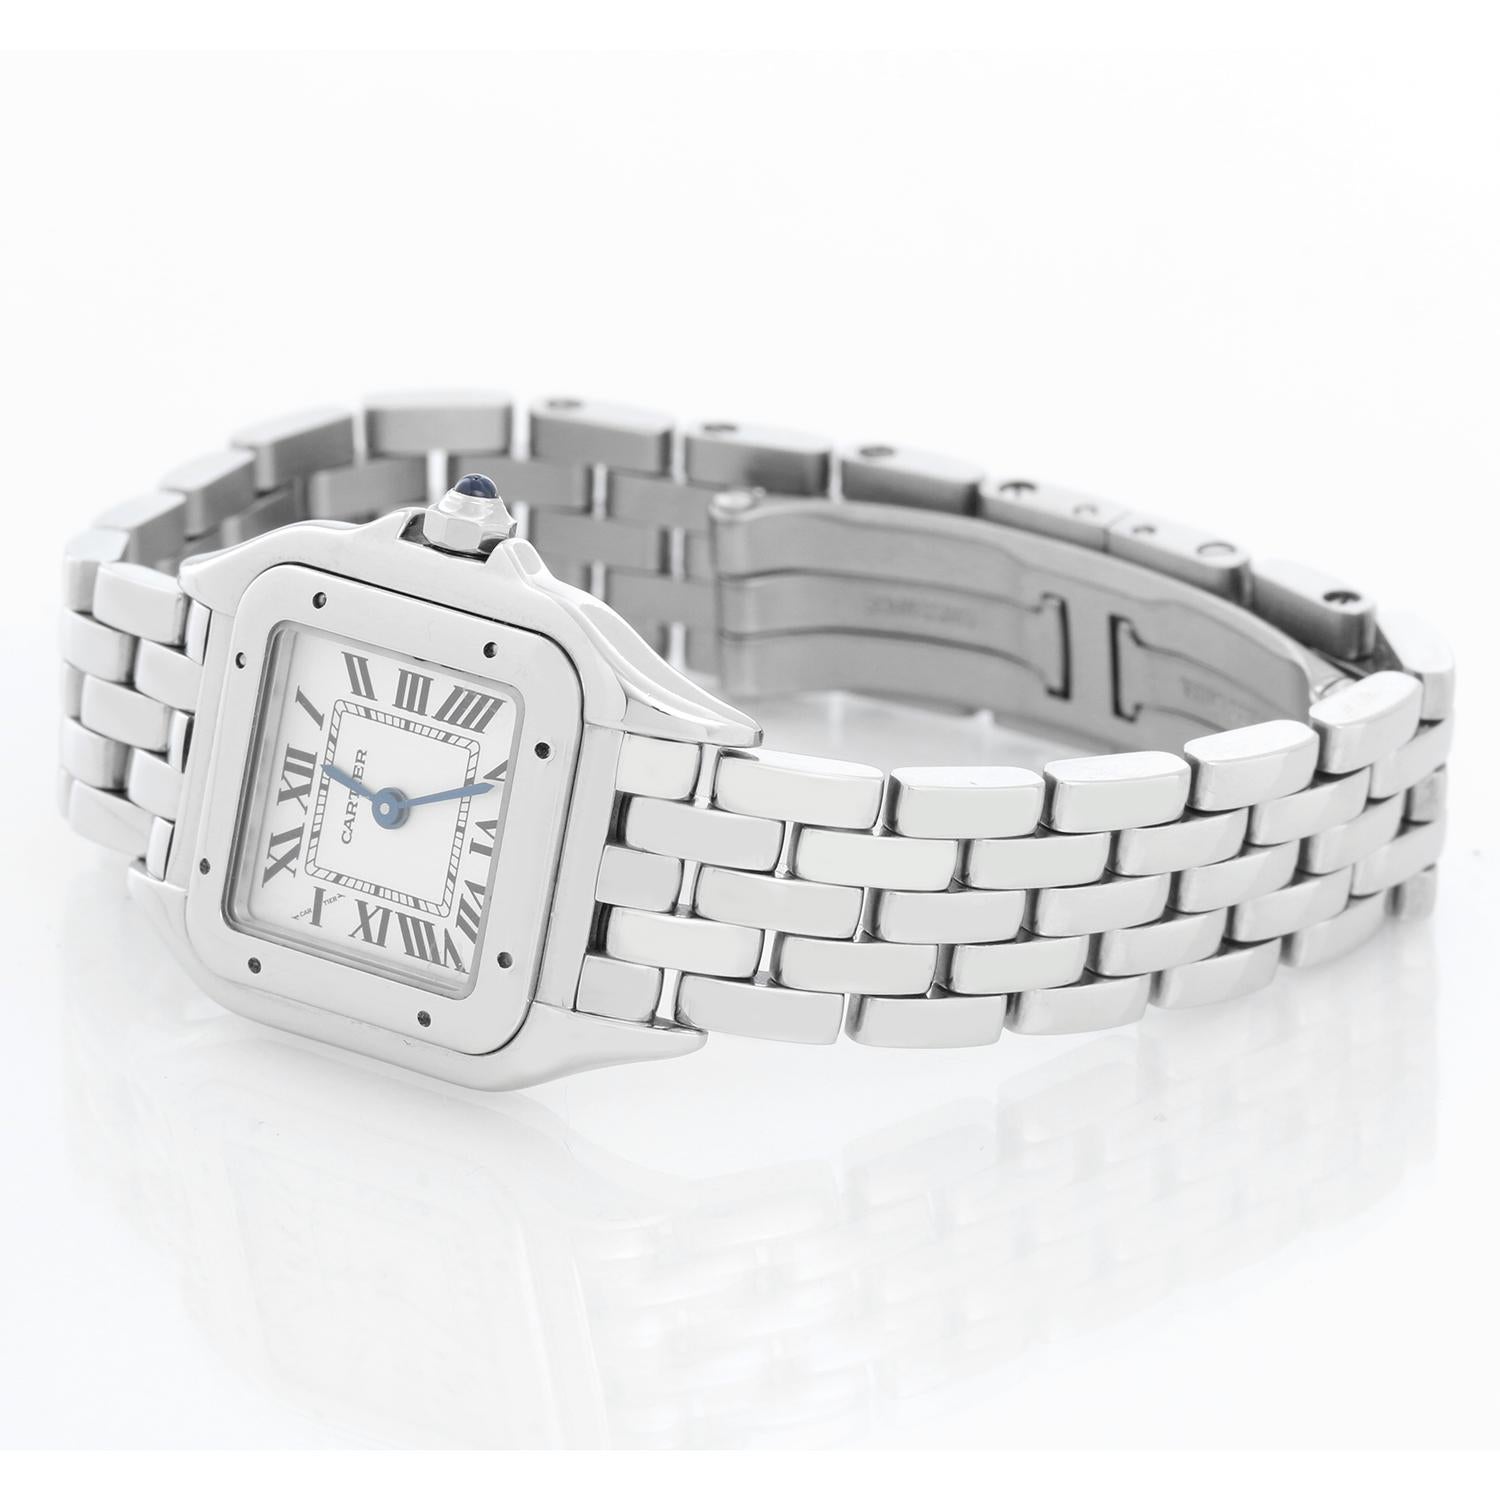 Cartier Ladies Stainless Steel Panthere Watch WSPN0006 4022 - Quartz. Stainless steel case (23mm x 30mm). silver colored dial with black Roman numerals. Stainless steel Panthere bracelet; will fit a 6 1/4 inch wrist . Pre-owned with custom box.